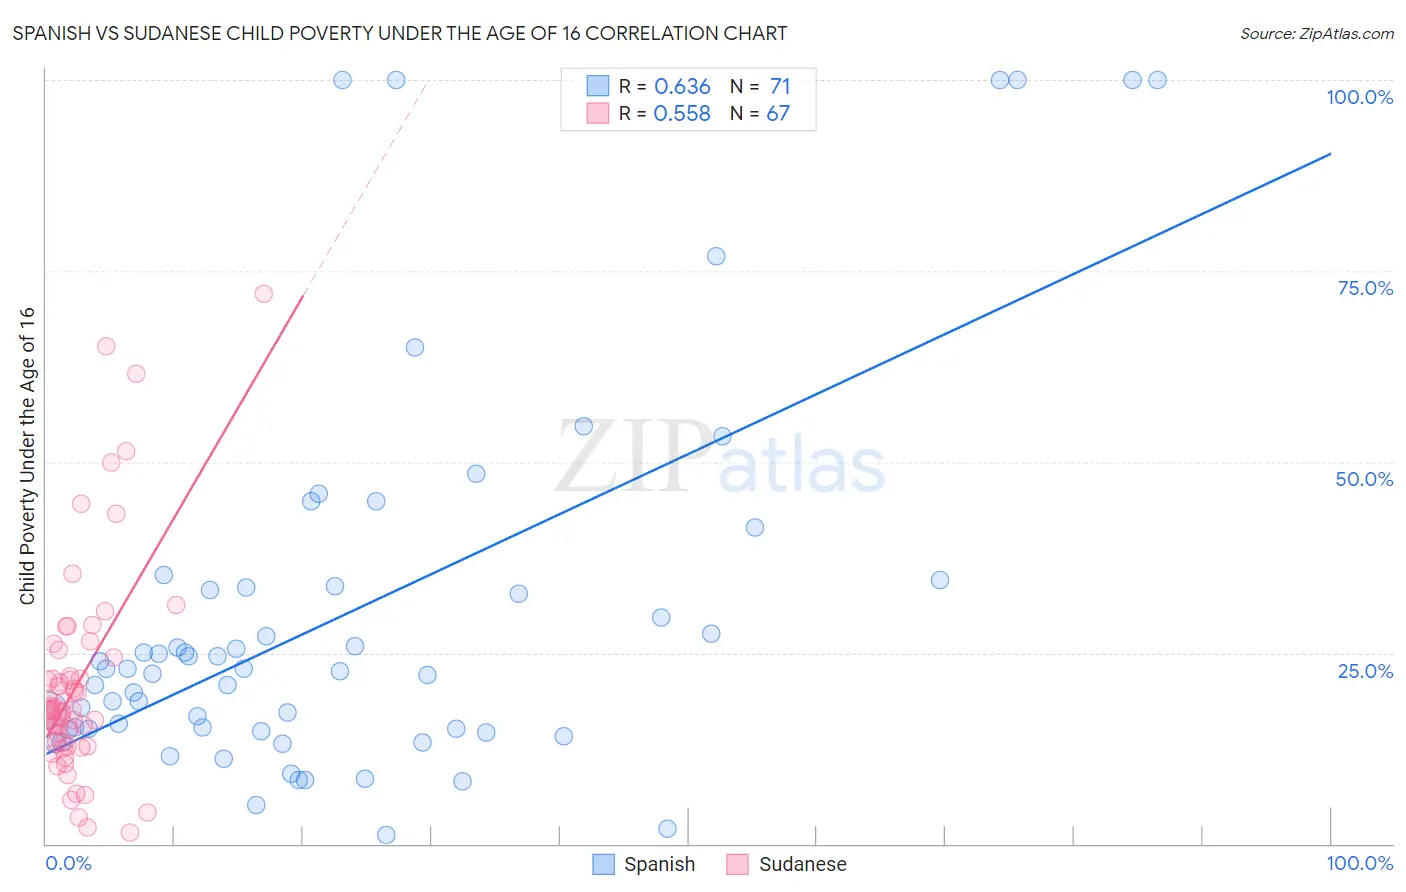 Spanish vs Sudanese Child Poverty Under the Age of 16